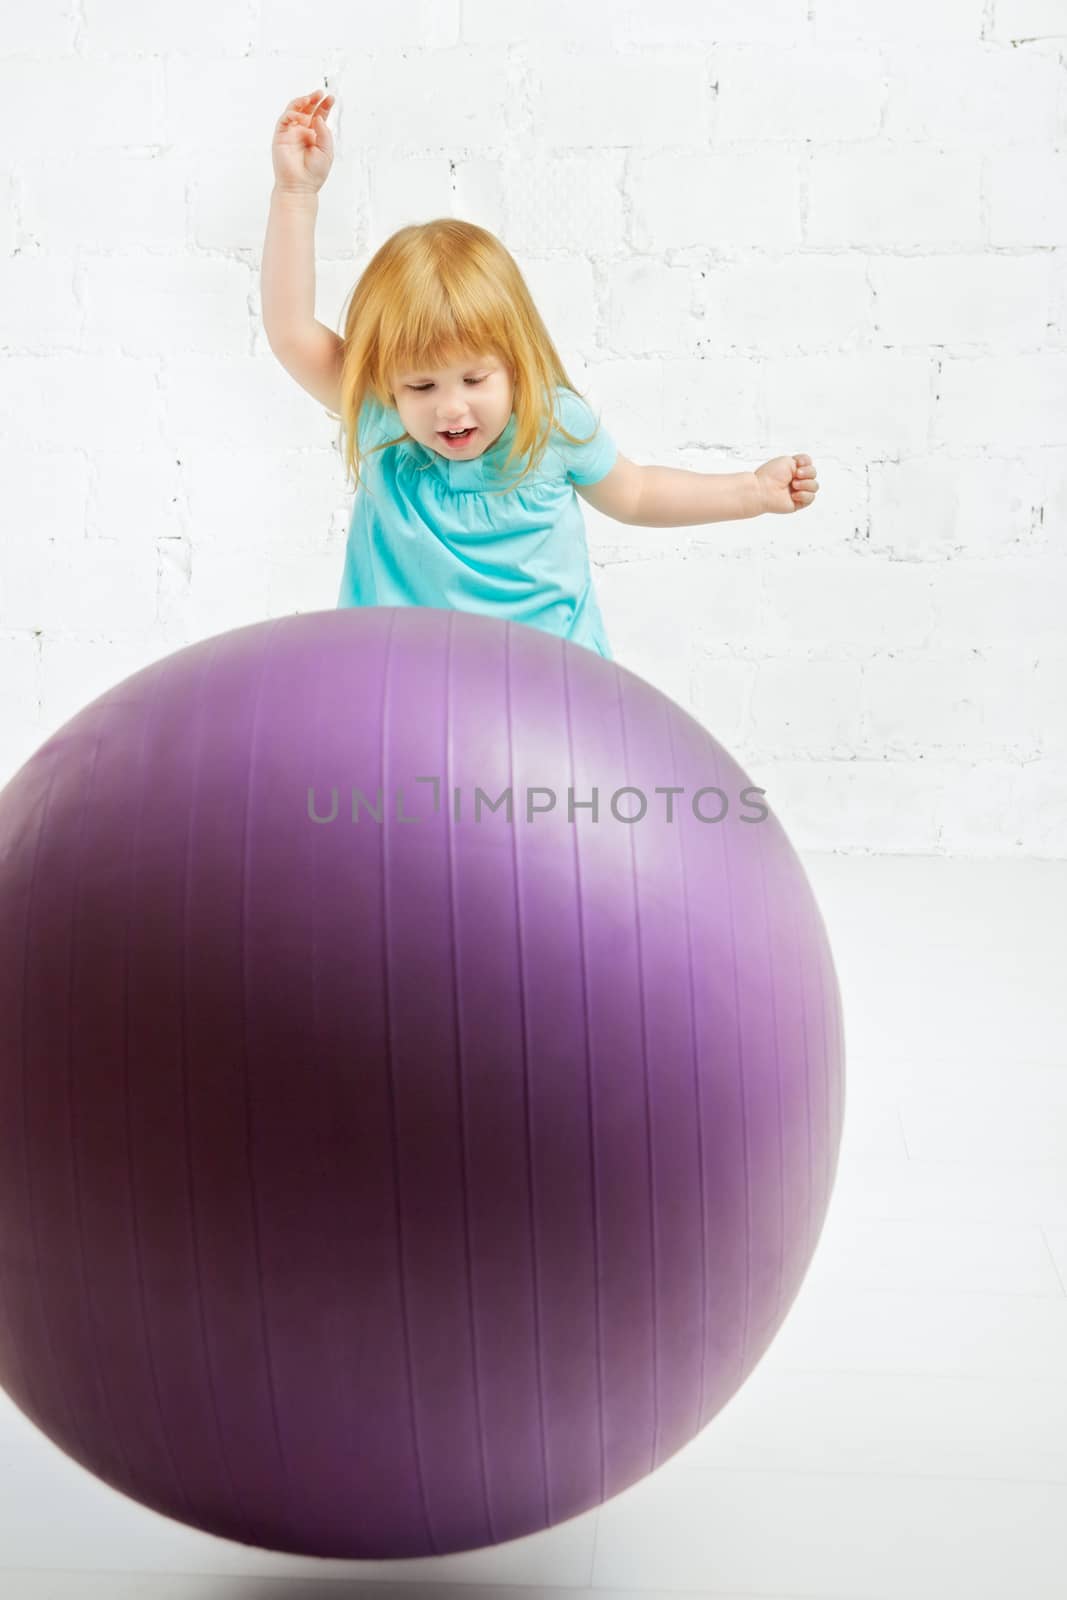 Girl With Ball by petr_malyshev